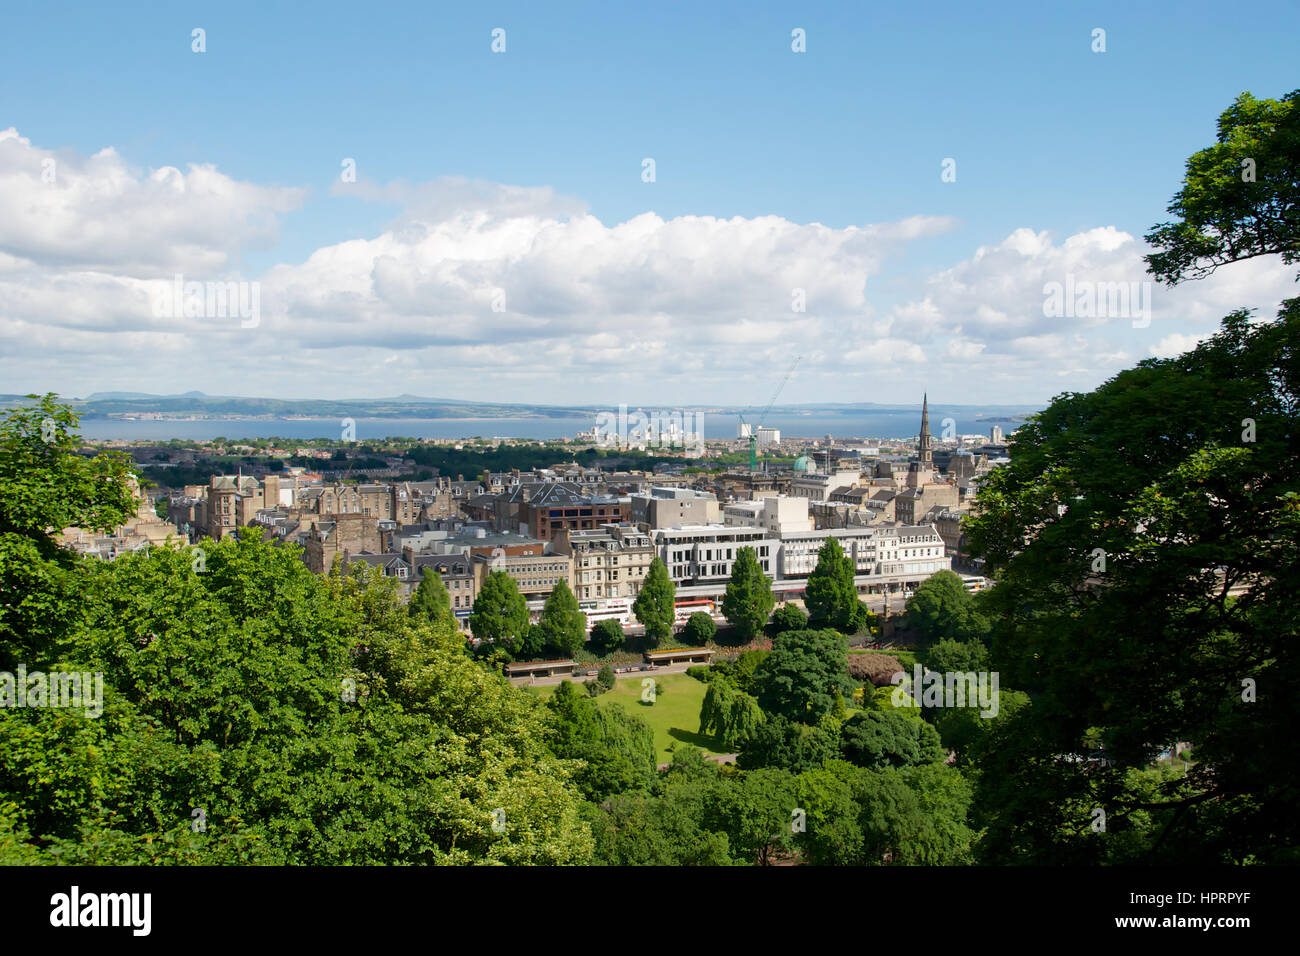 View from the Castle in Edinburgh, Scotland Stock Photo